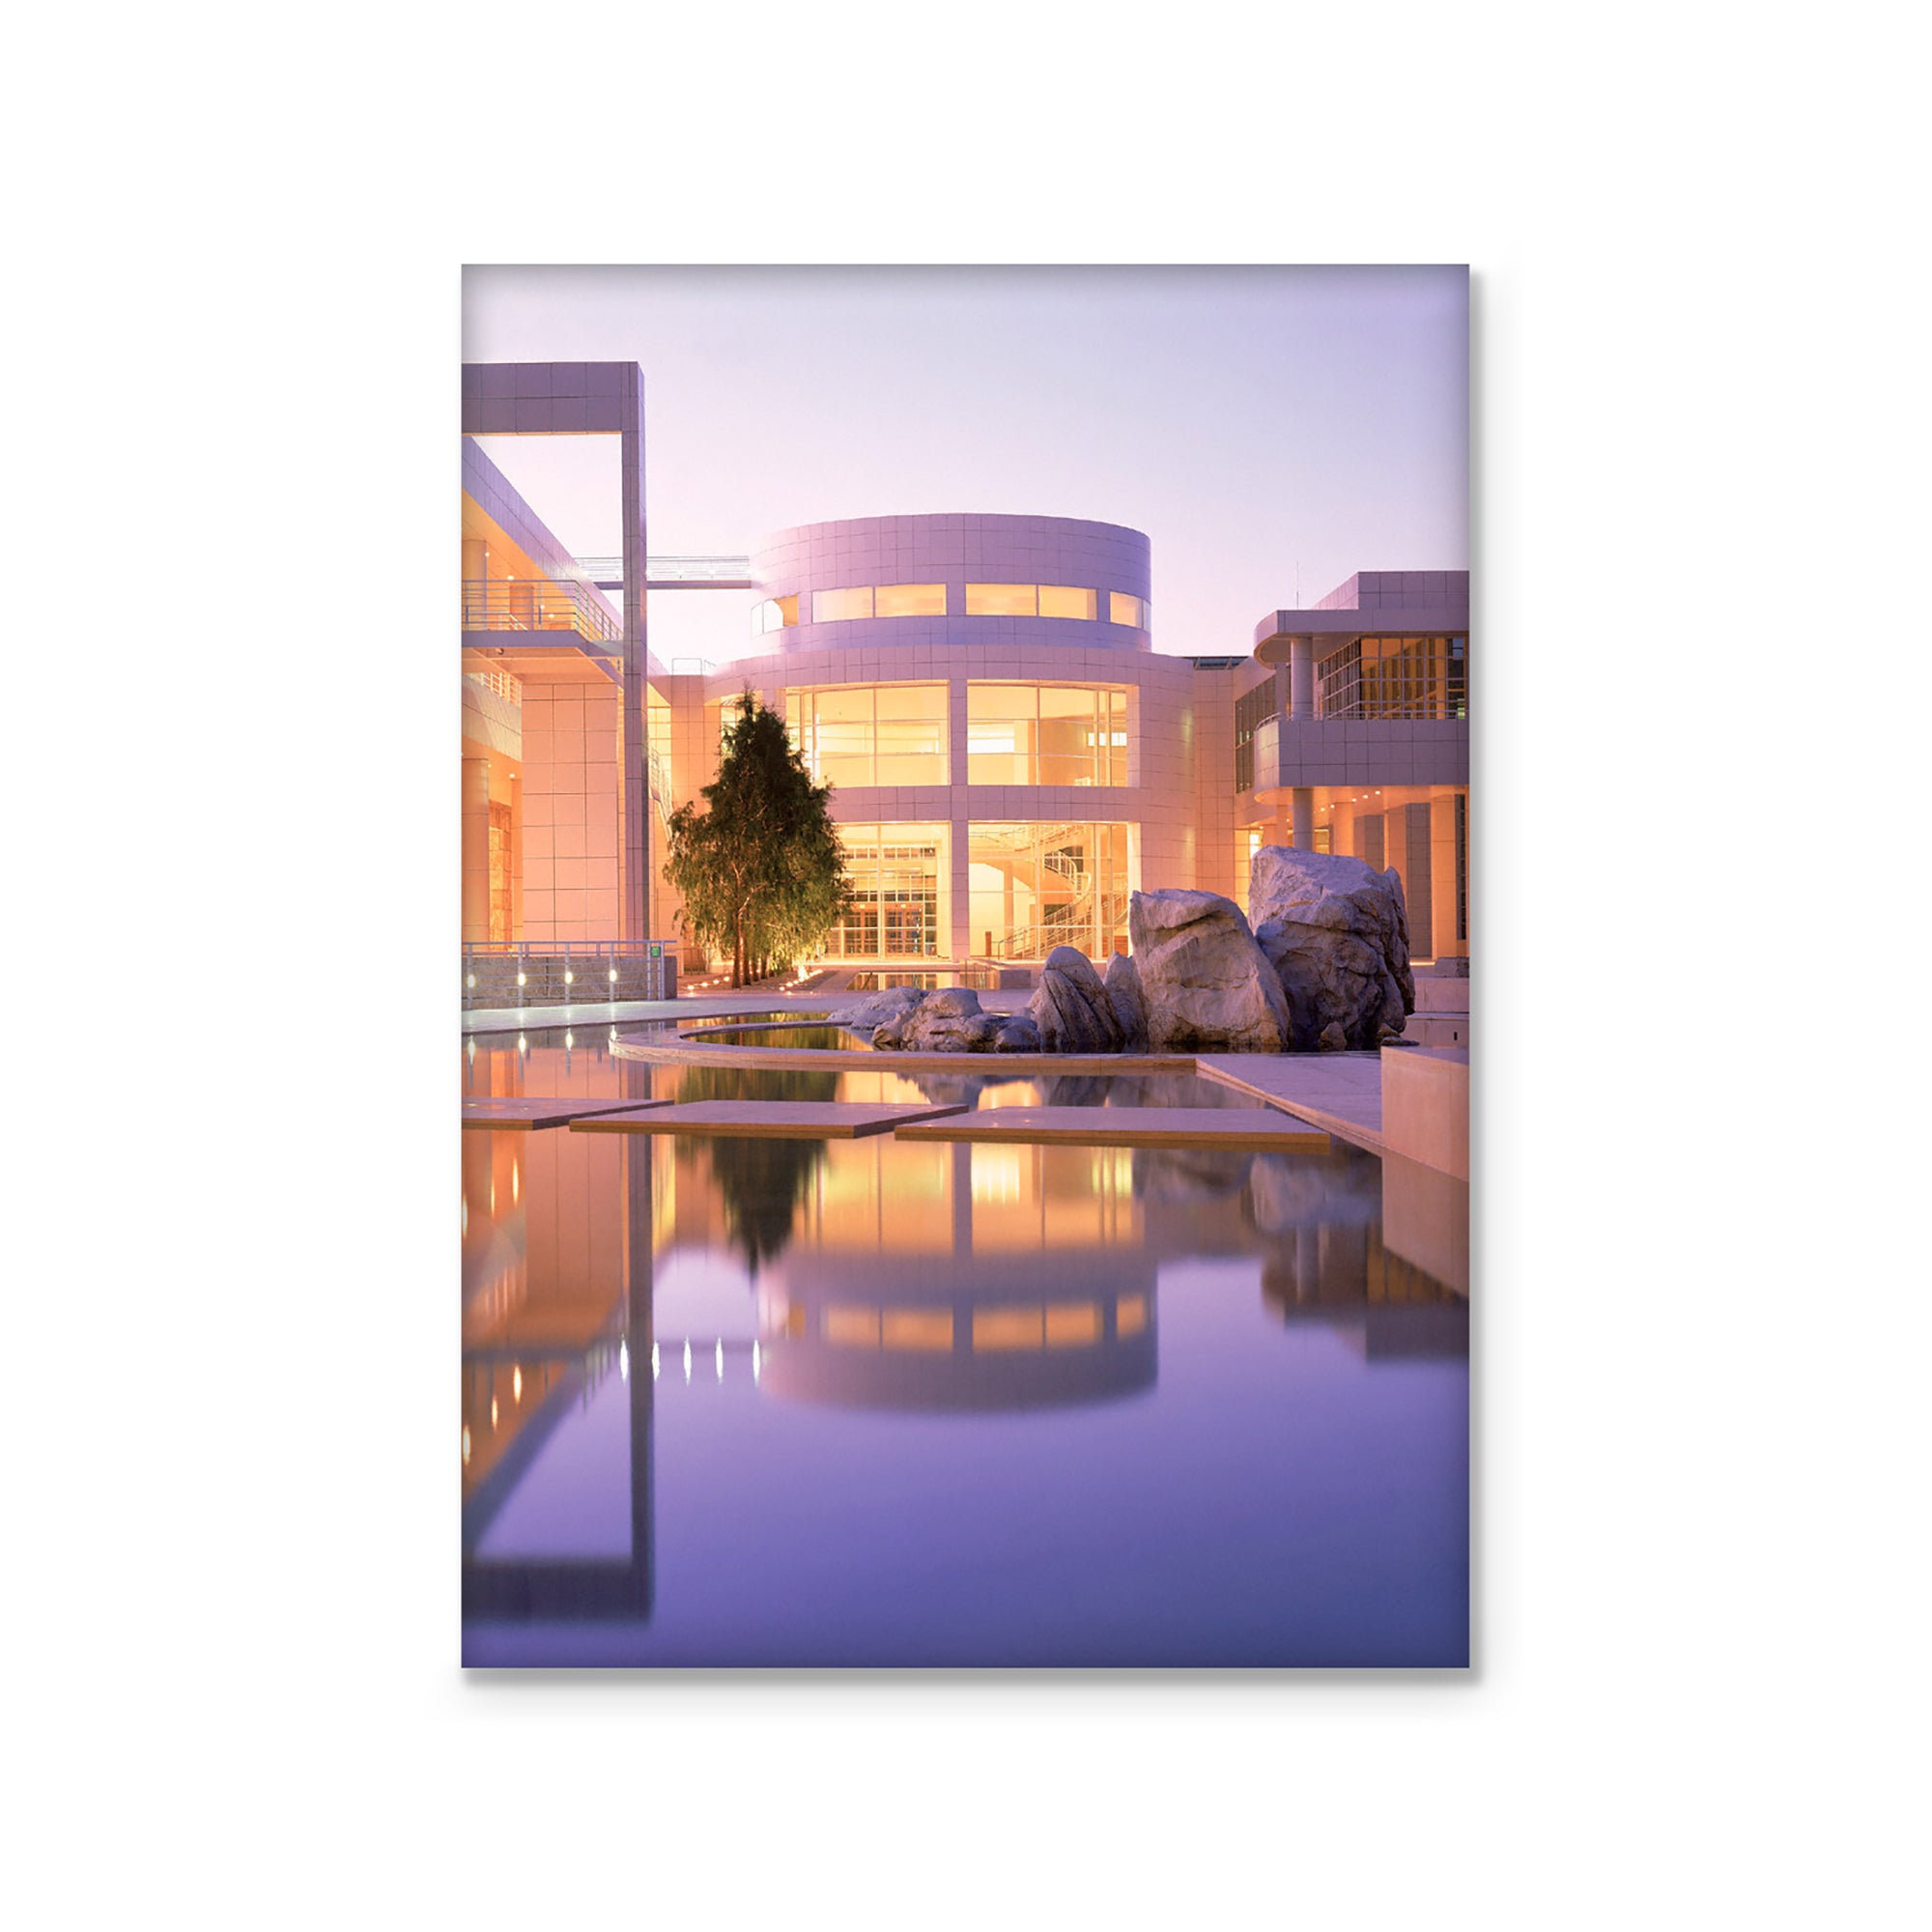 Magnet- Getty Center Courtyard at Dusk | Getty Store